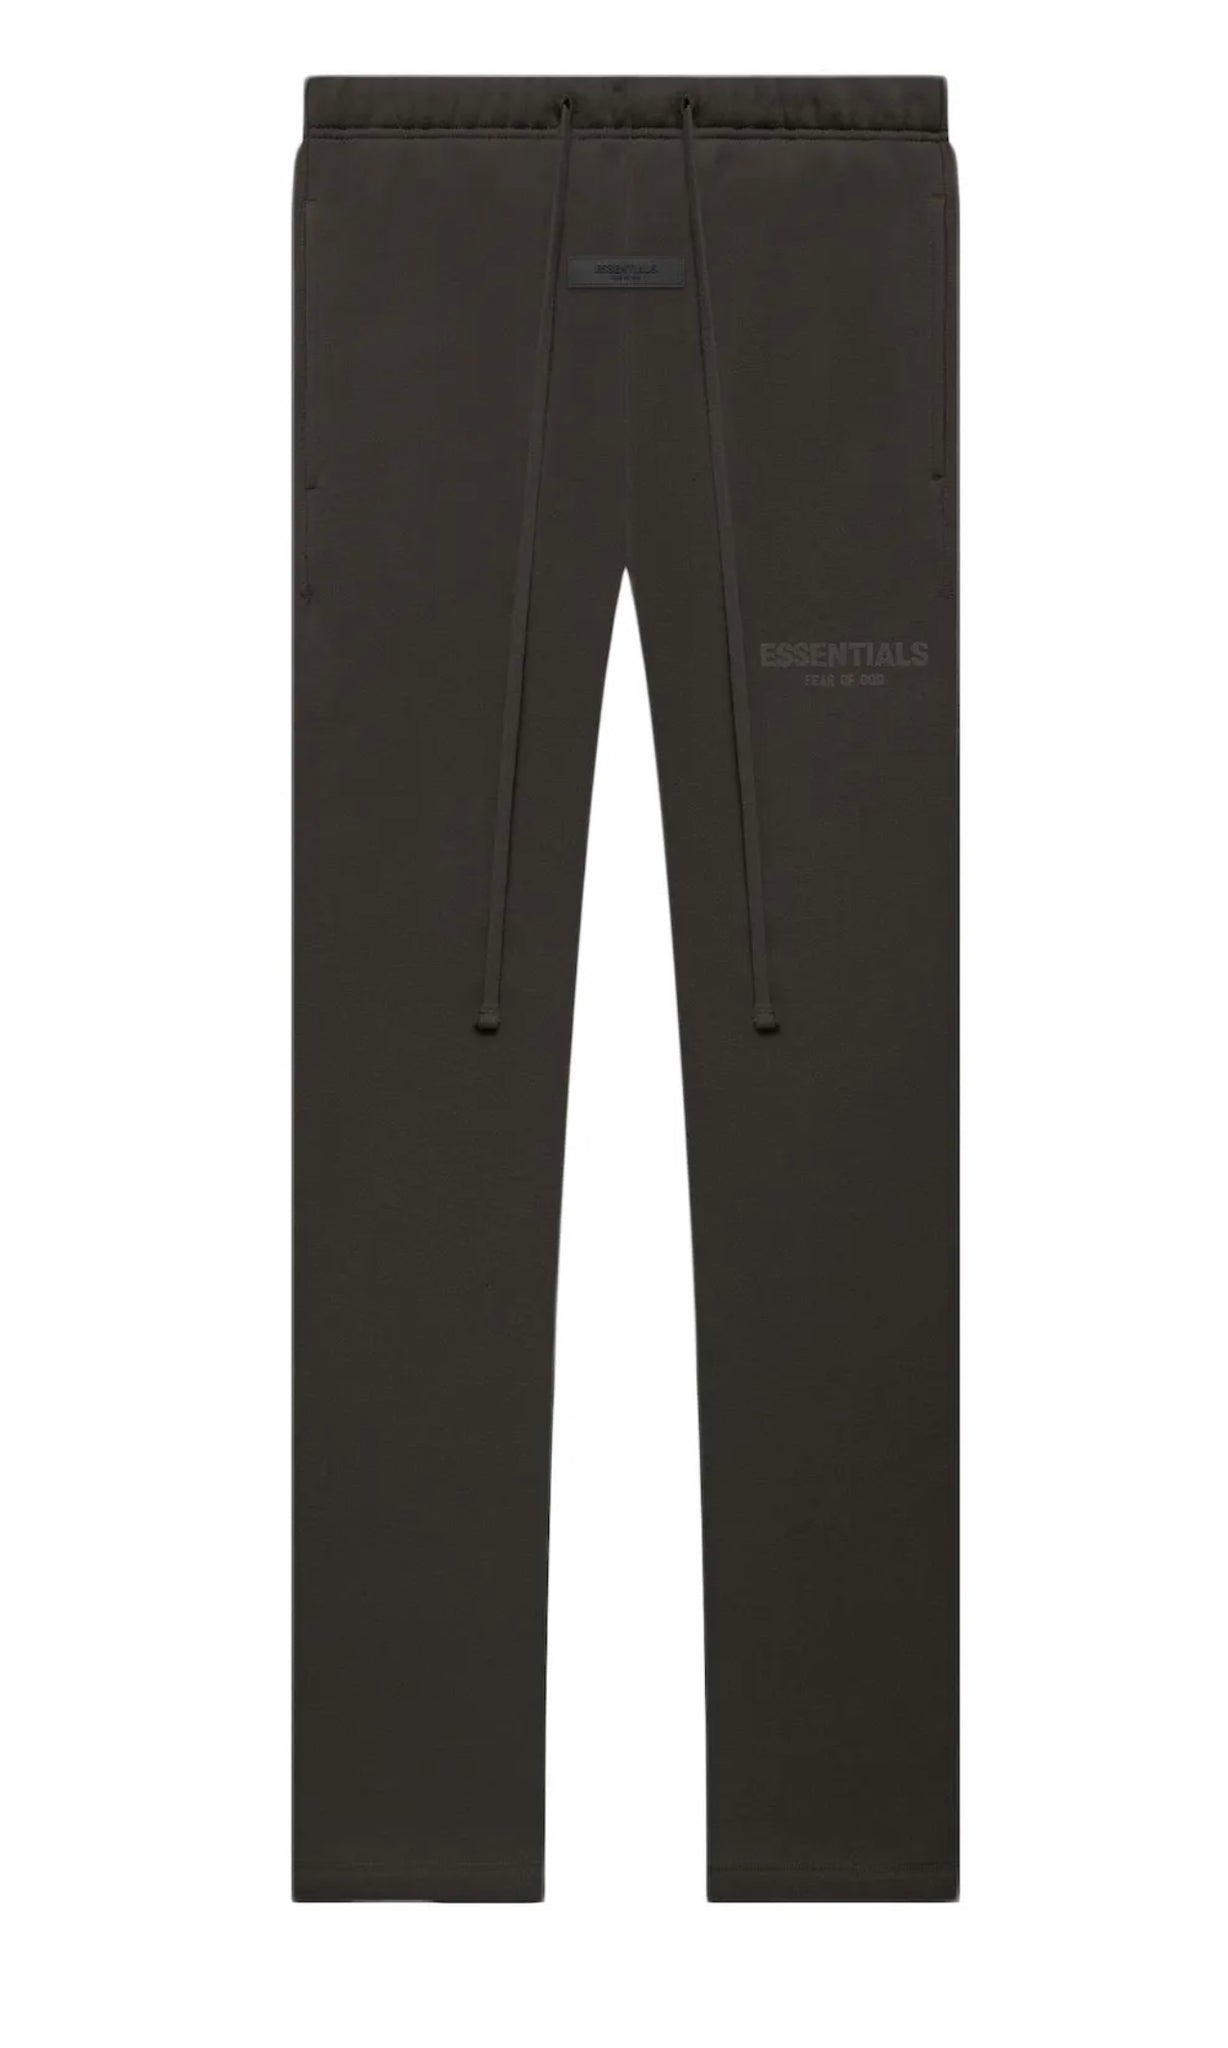 Fear of God Essentials Relaxed Sweatpants SS23